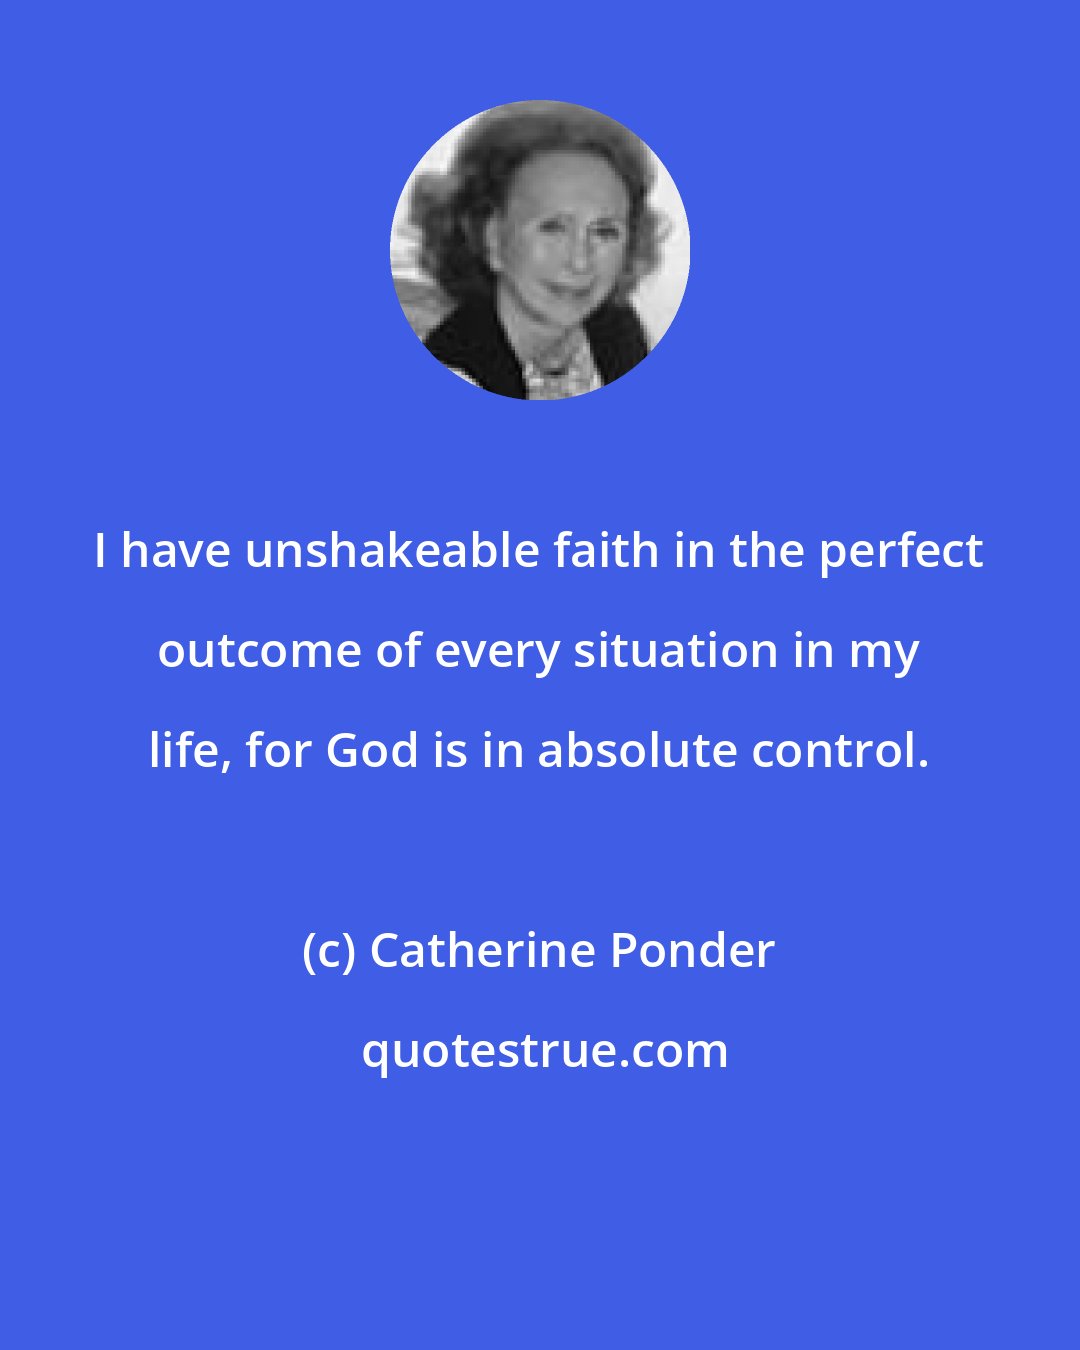 Catherine Ponder: I have unshakeable faith in the perfect outcome of every situation in my life, for God is in absolute control.